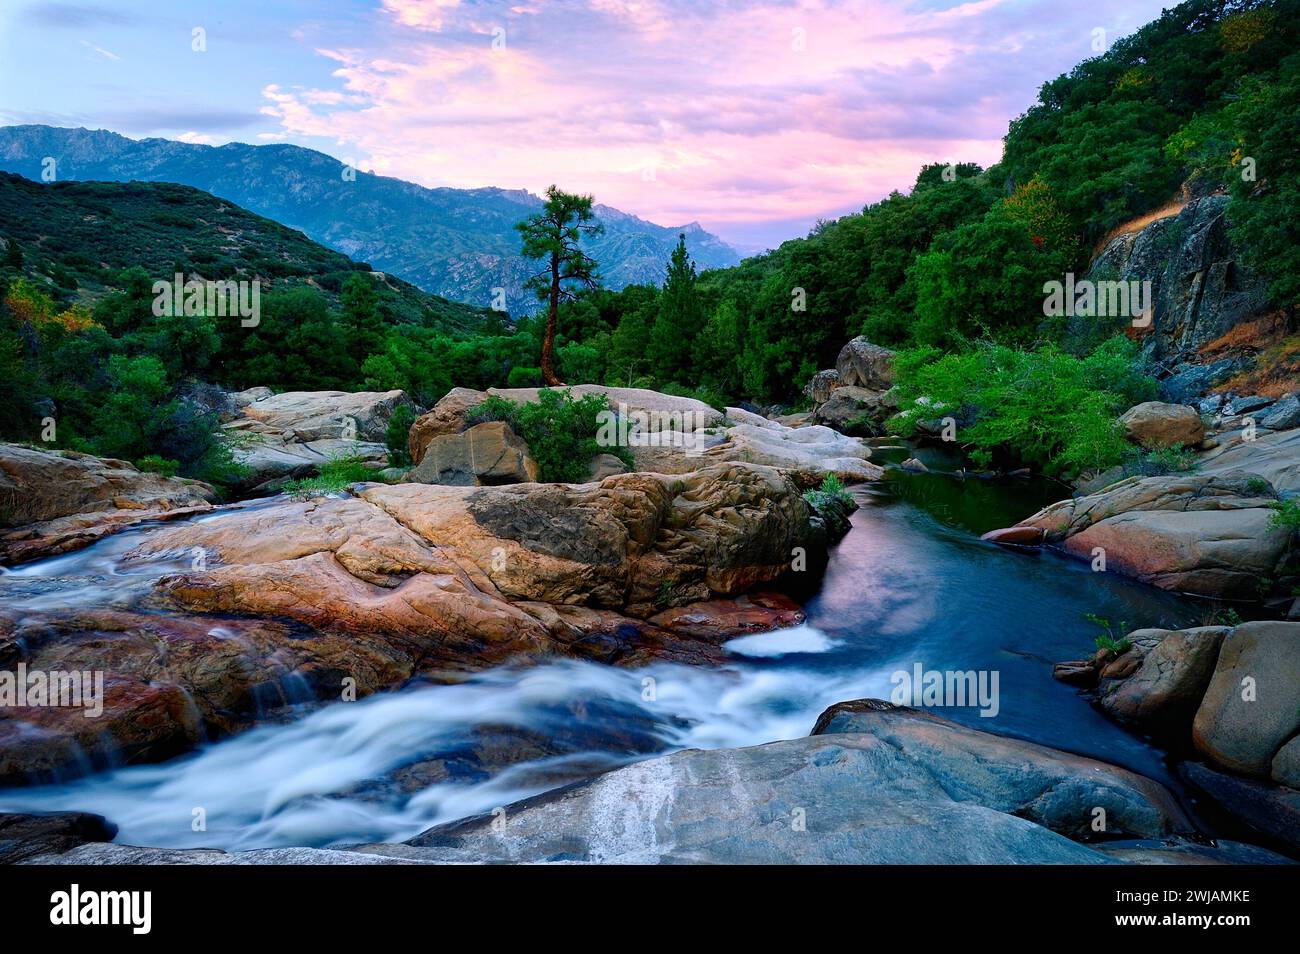 A colorful sunset above a mountain stream with rocks, trees, and vegetation Kings Canyon, California. Stock Photo